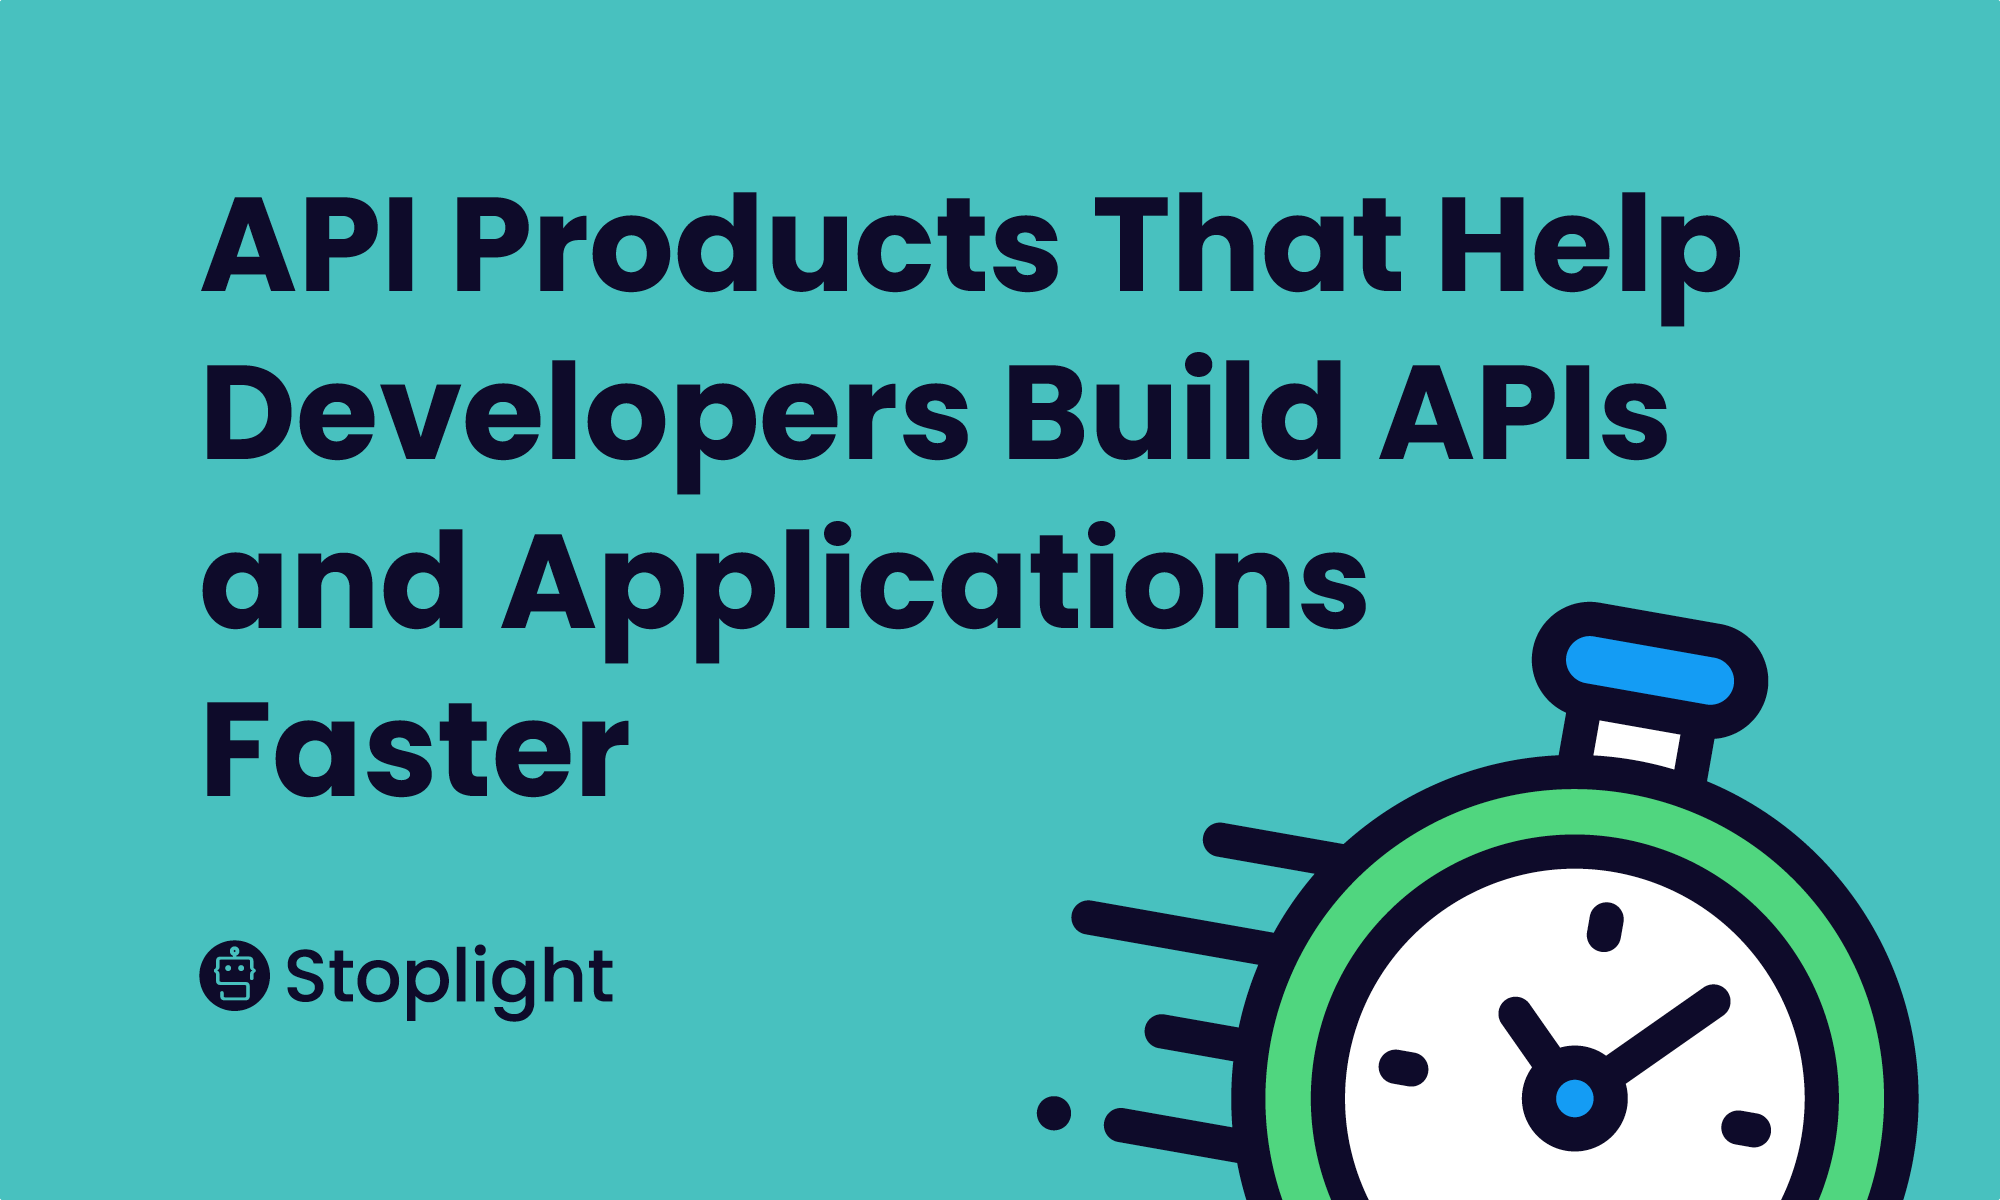 API Products That Help Developers Build APIs and Applications Faster